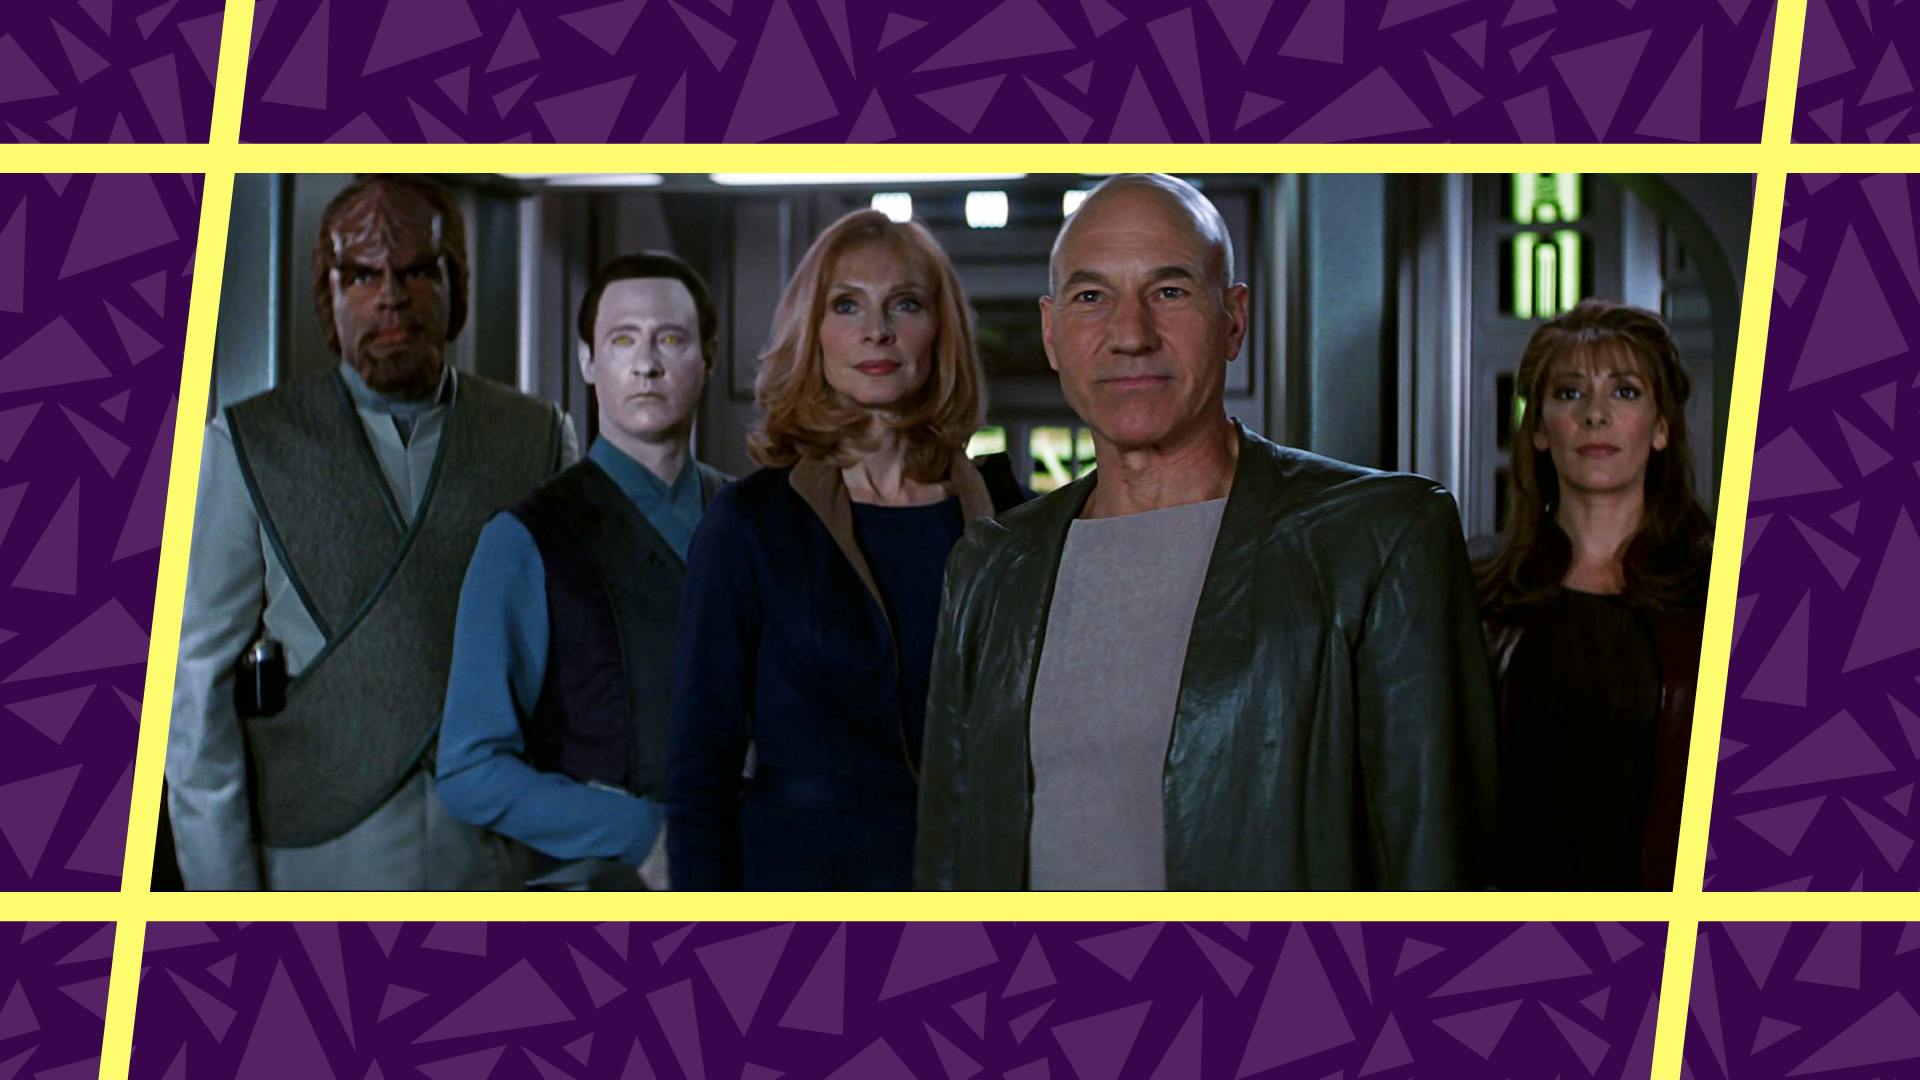 Stylized still from Star Trek Insurrection featuring Jean-Luc Picard, Worf, Data, Beverly Crusher, and Deanna Troi